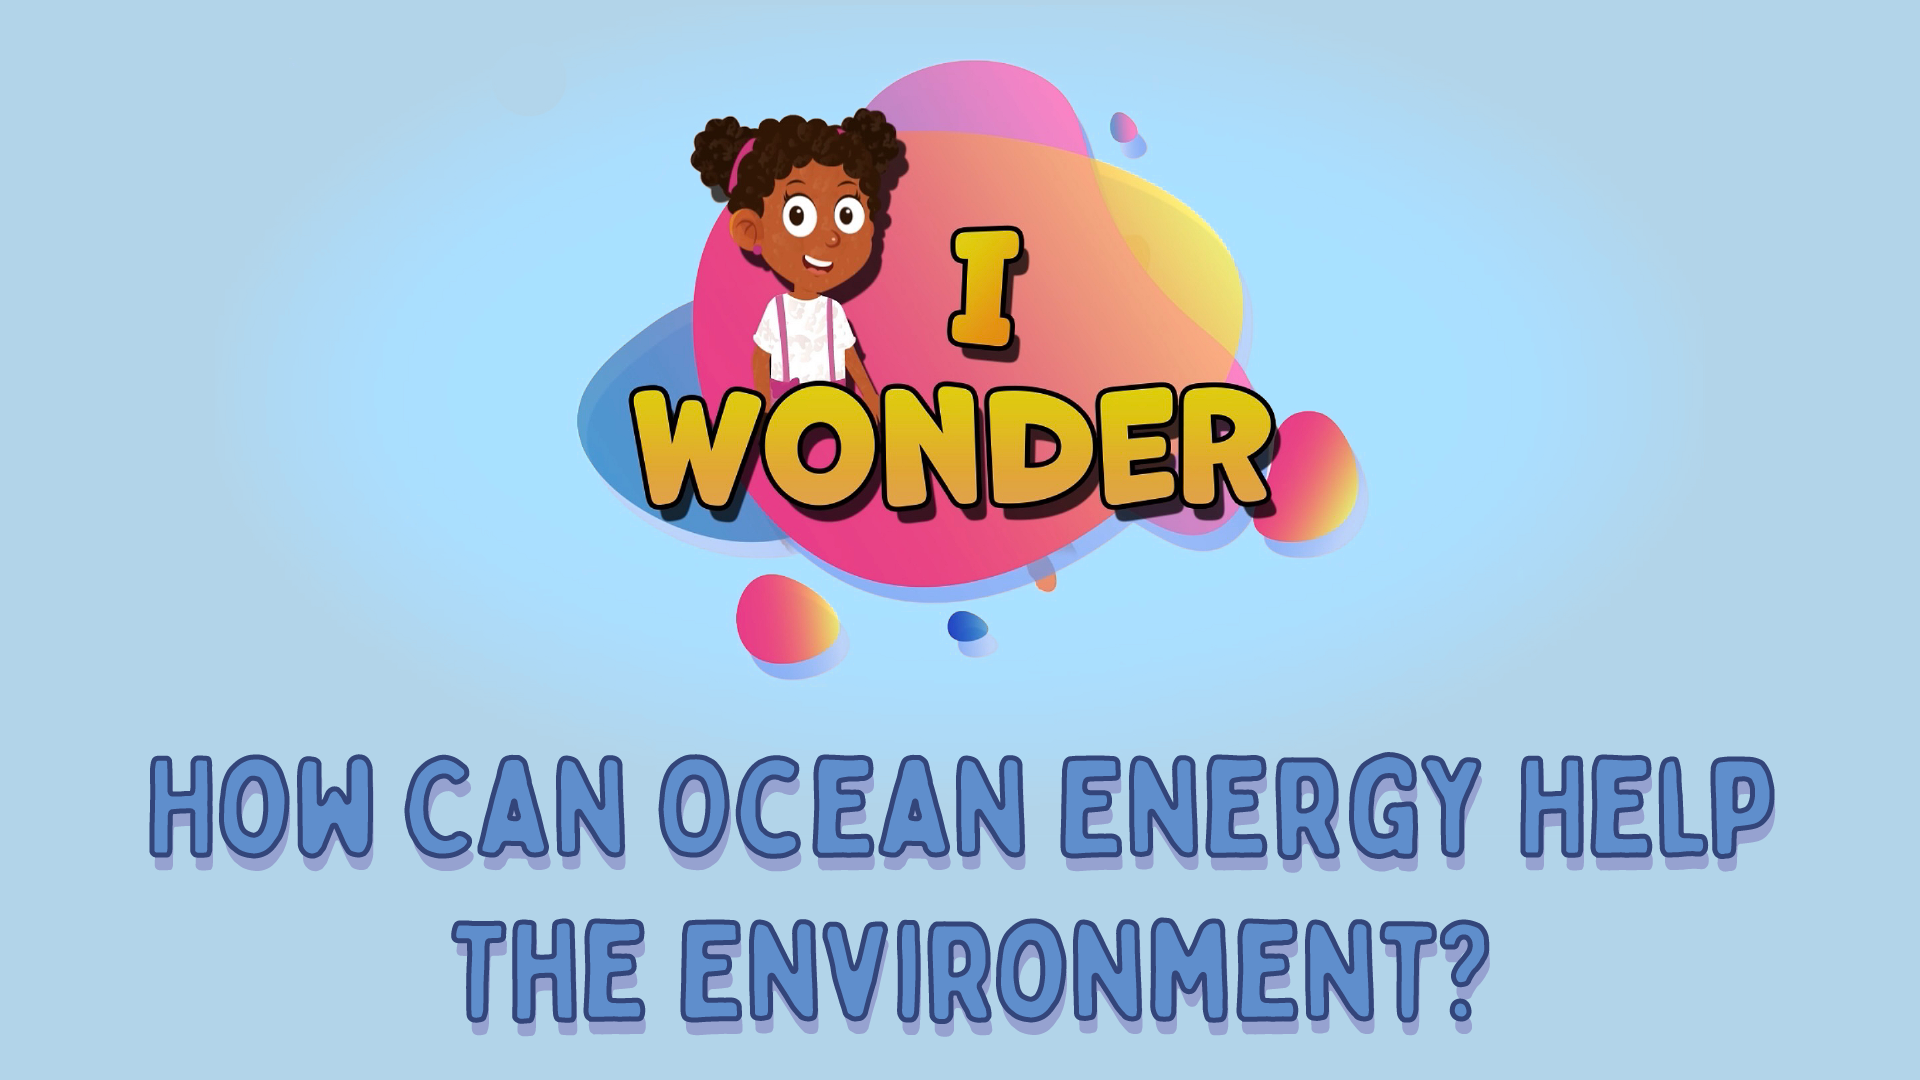 How Can Ocean Energy Help The Environment?